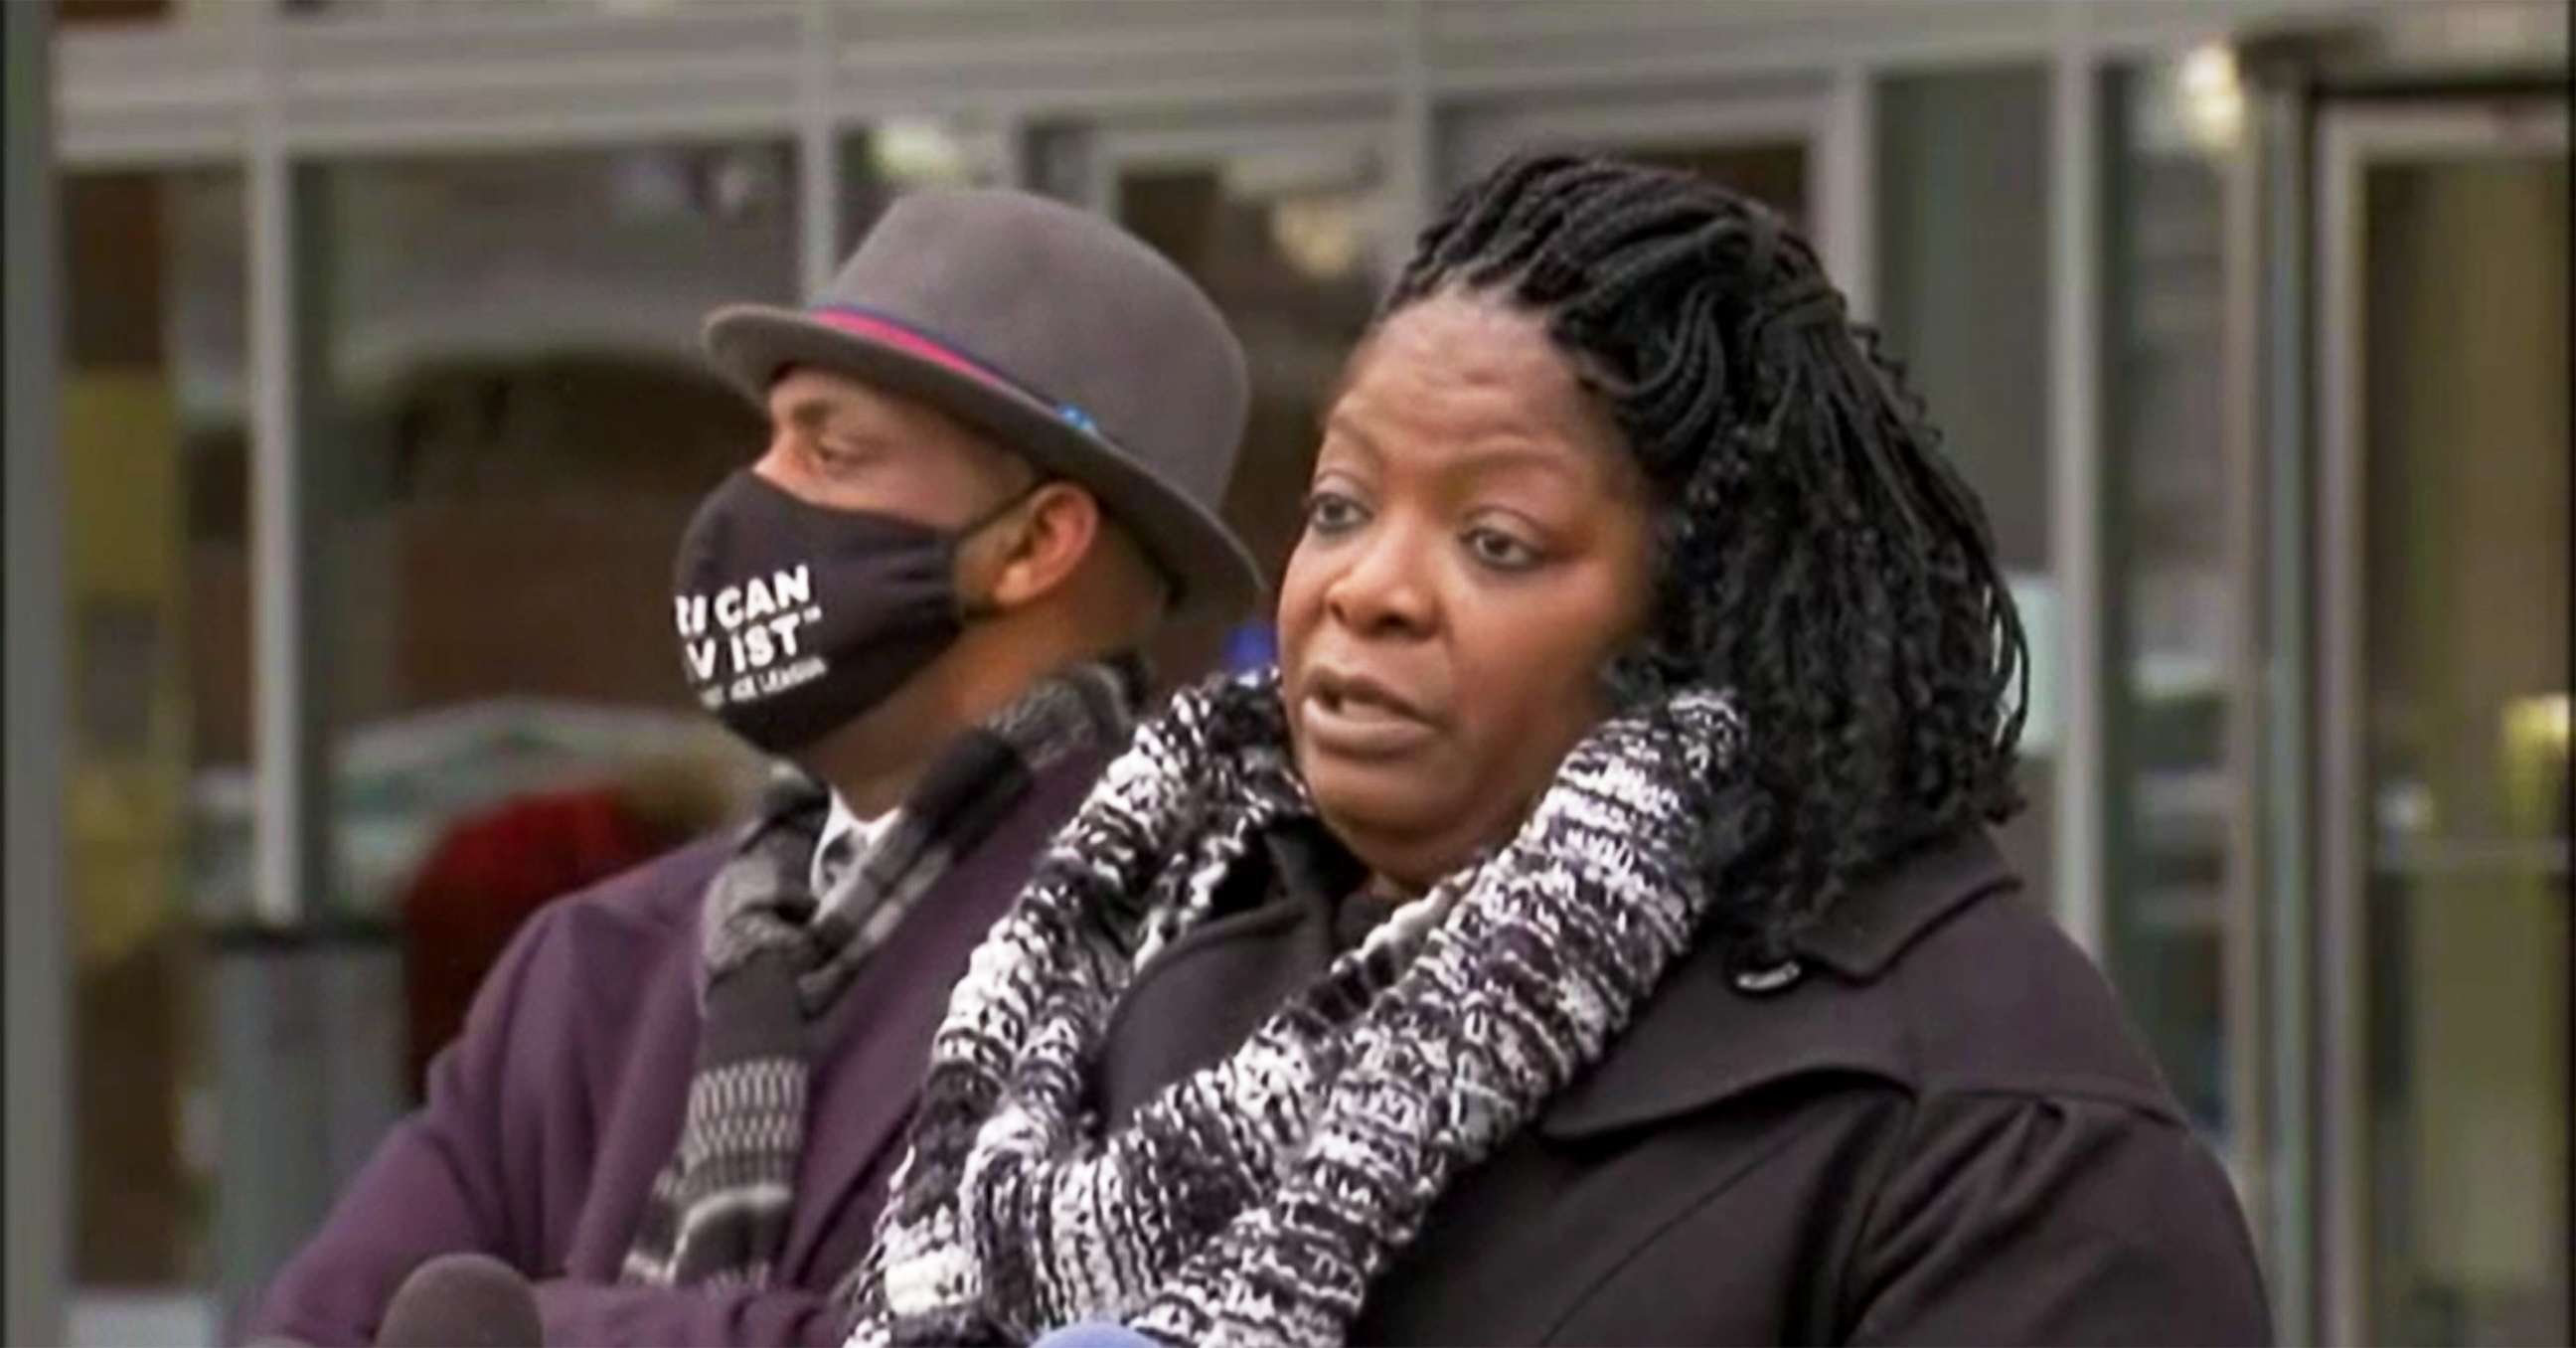 PHOTO: Anjanette Young speaks during a press conference, addressing a Feb. 21, 2019 incident where Chicago police wrongfully raided her home which was caught on bodycam video, in front of the Chicago Police department headquarters on Dec. 15, 2020.